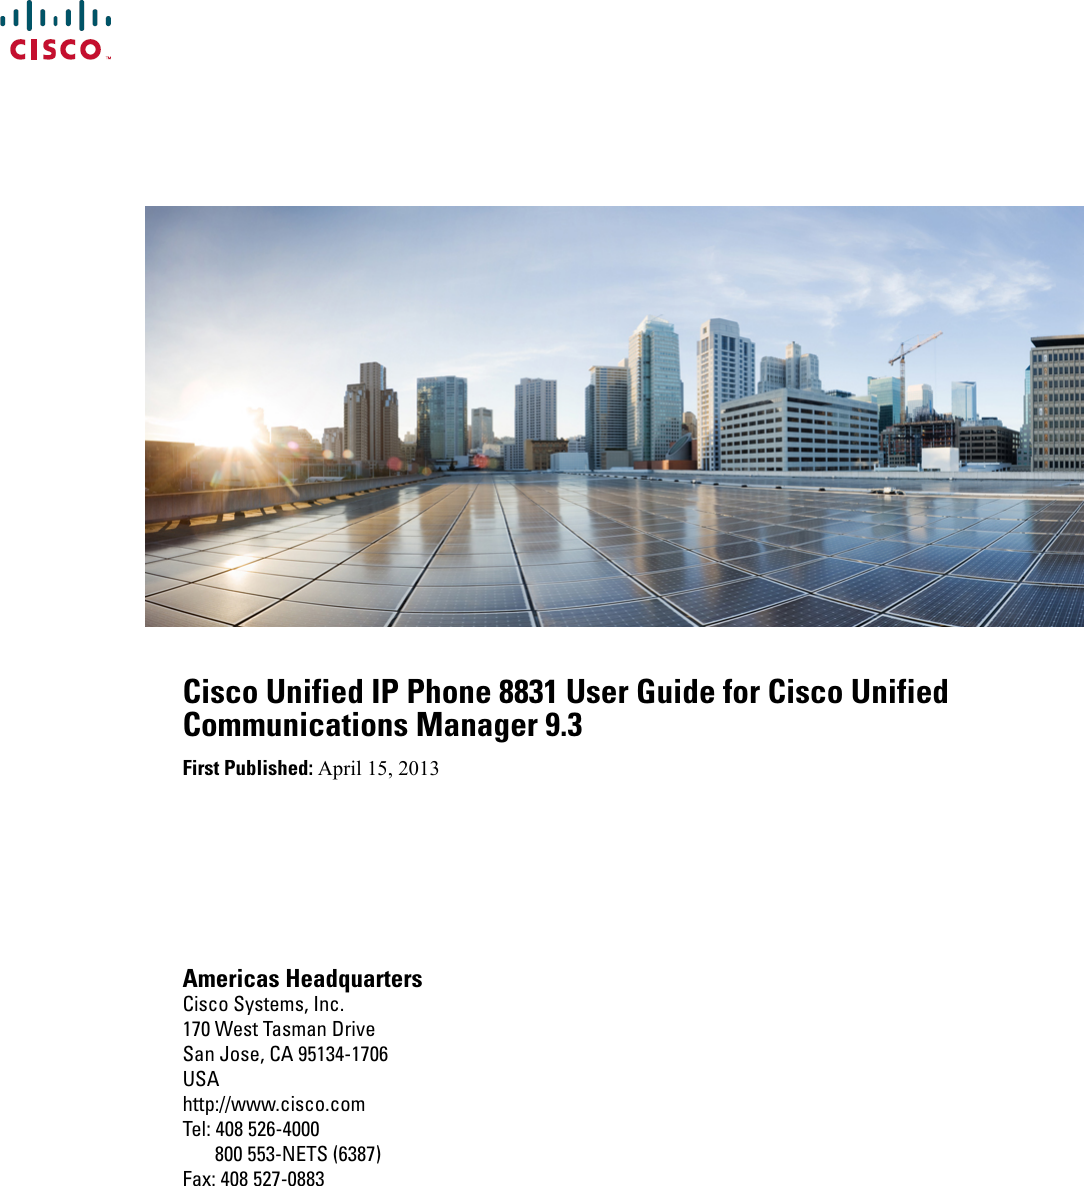 Cisco Unified IP Phone 8831 User Guide for Cisco UnifiedCommunications Manager 9.3First Published: April 15, 2013Americas HeadquartersCisco Systems, Inc.170 West Tasman DriveSan Jose, CA 95134-1706USAhttp://www.cisco.comTel: 408 526-4000       800 553-NETS (6387)Fax: 408 527-0883